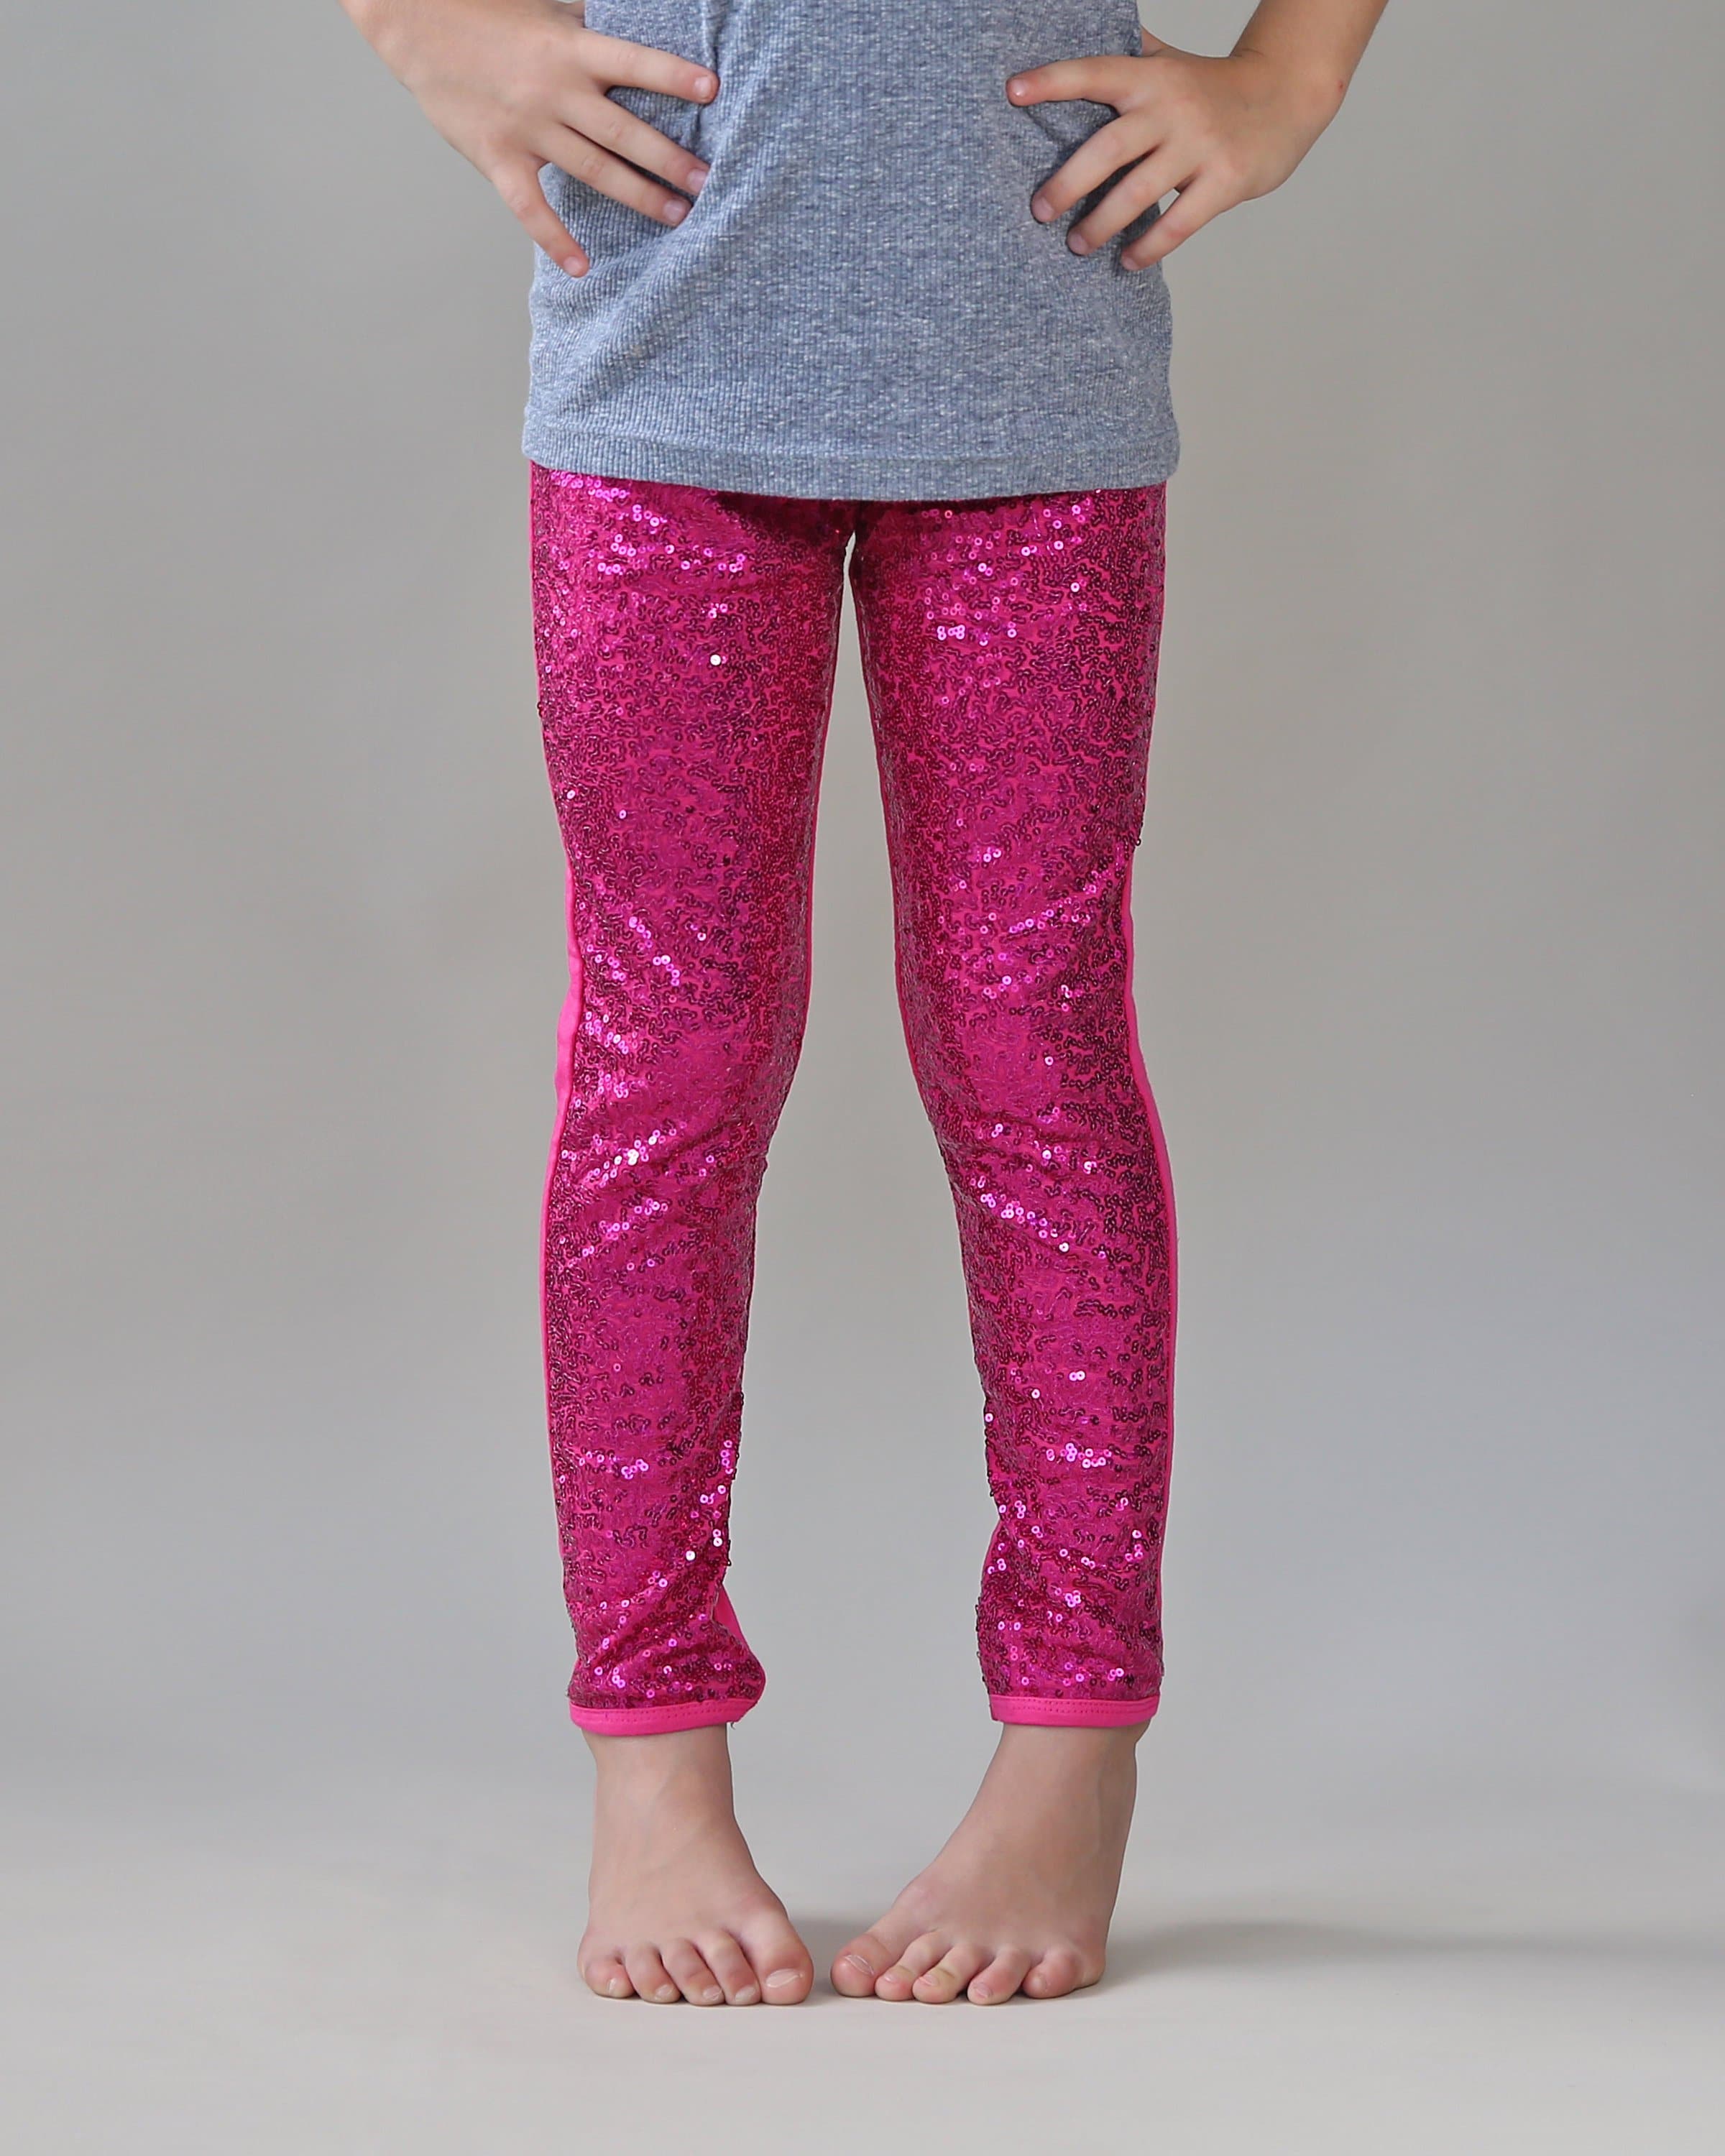 Next SEQUIN STANDARD - Leggings - Trousers - pink holographic